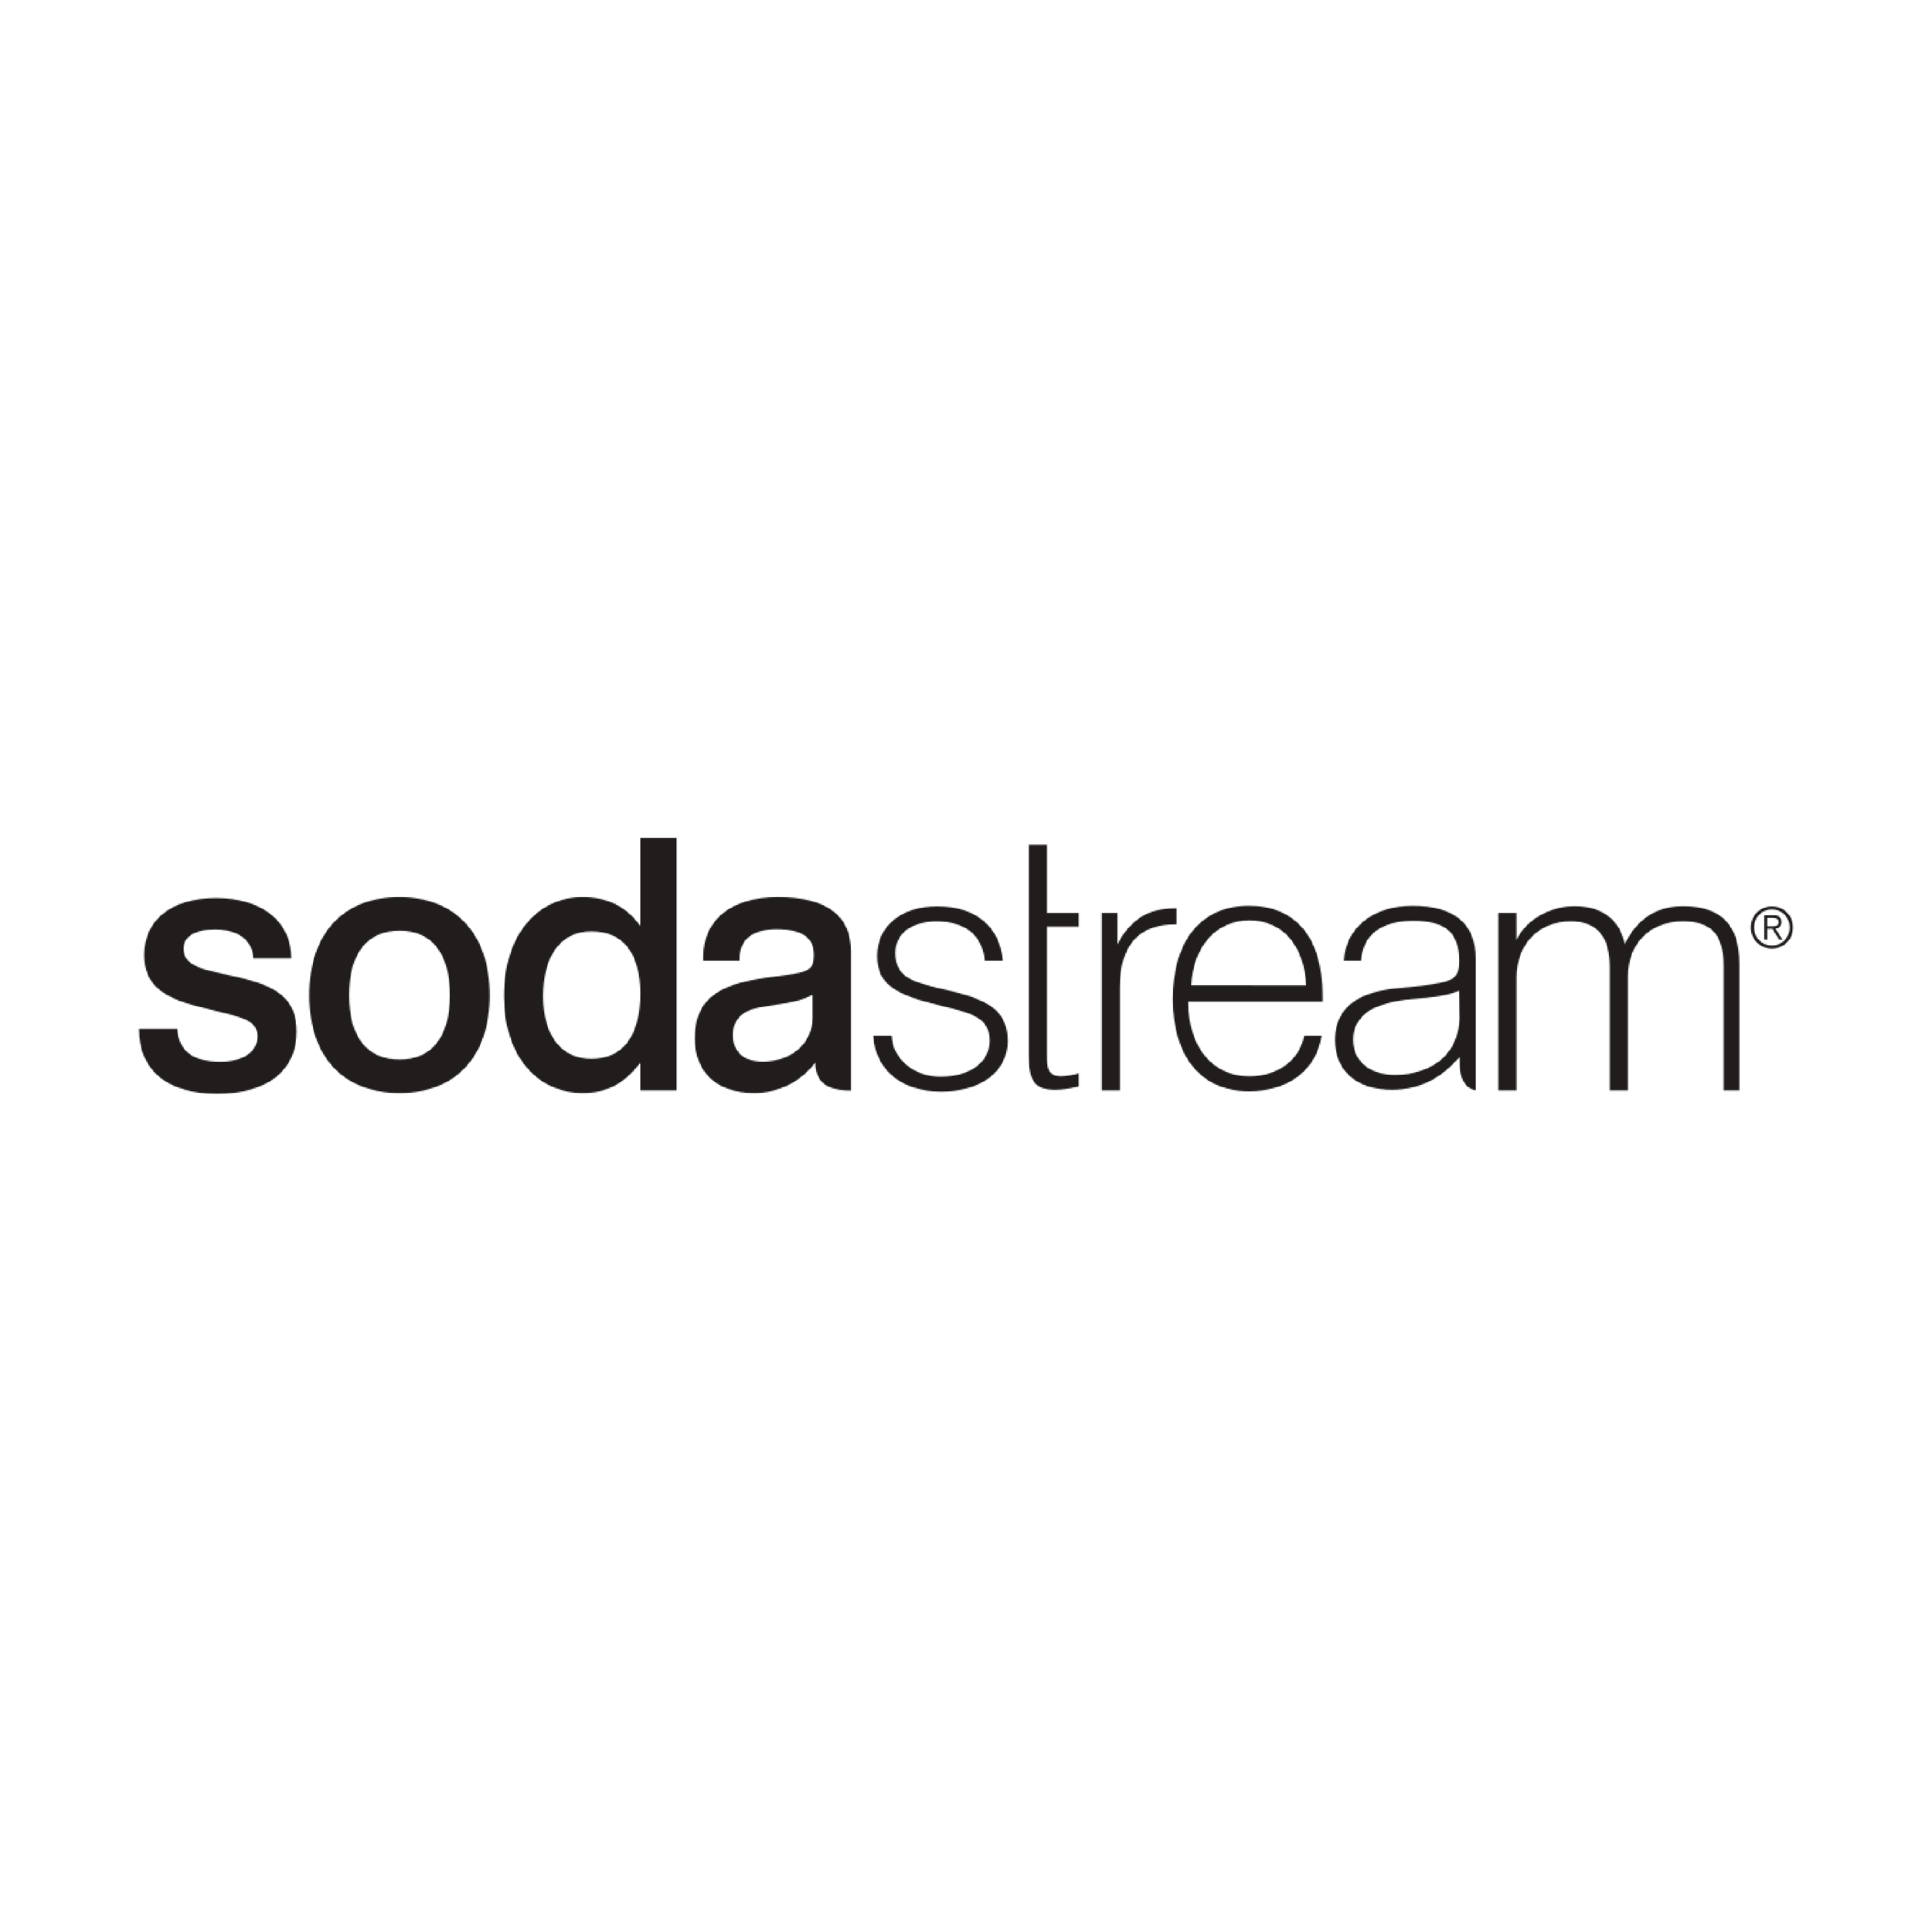 JoingJules-FeaturedLogos_Sodastream.png